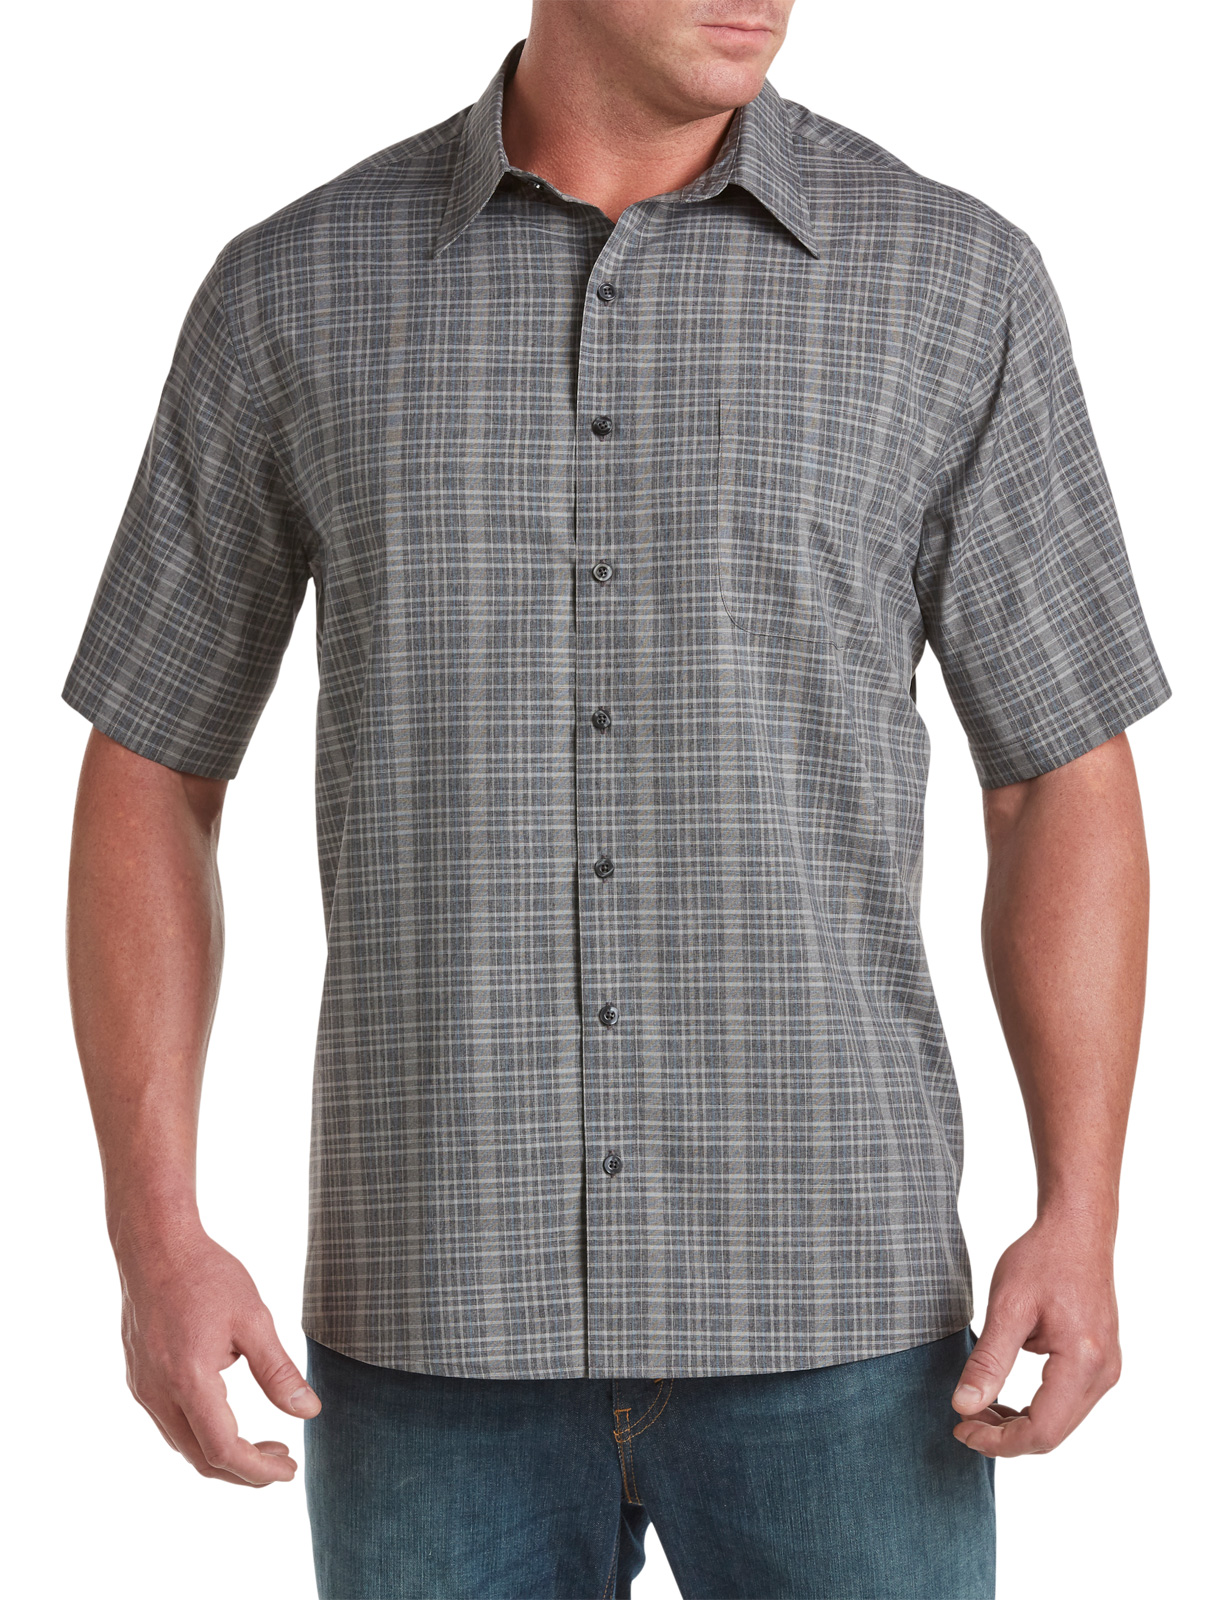 Synrgy Men's Big and Tall Small Plaid Microfiber Sport Shirt